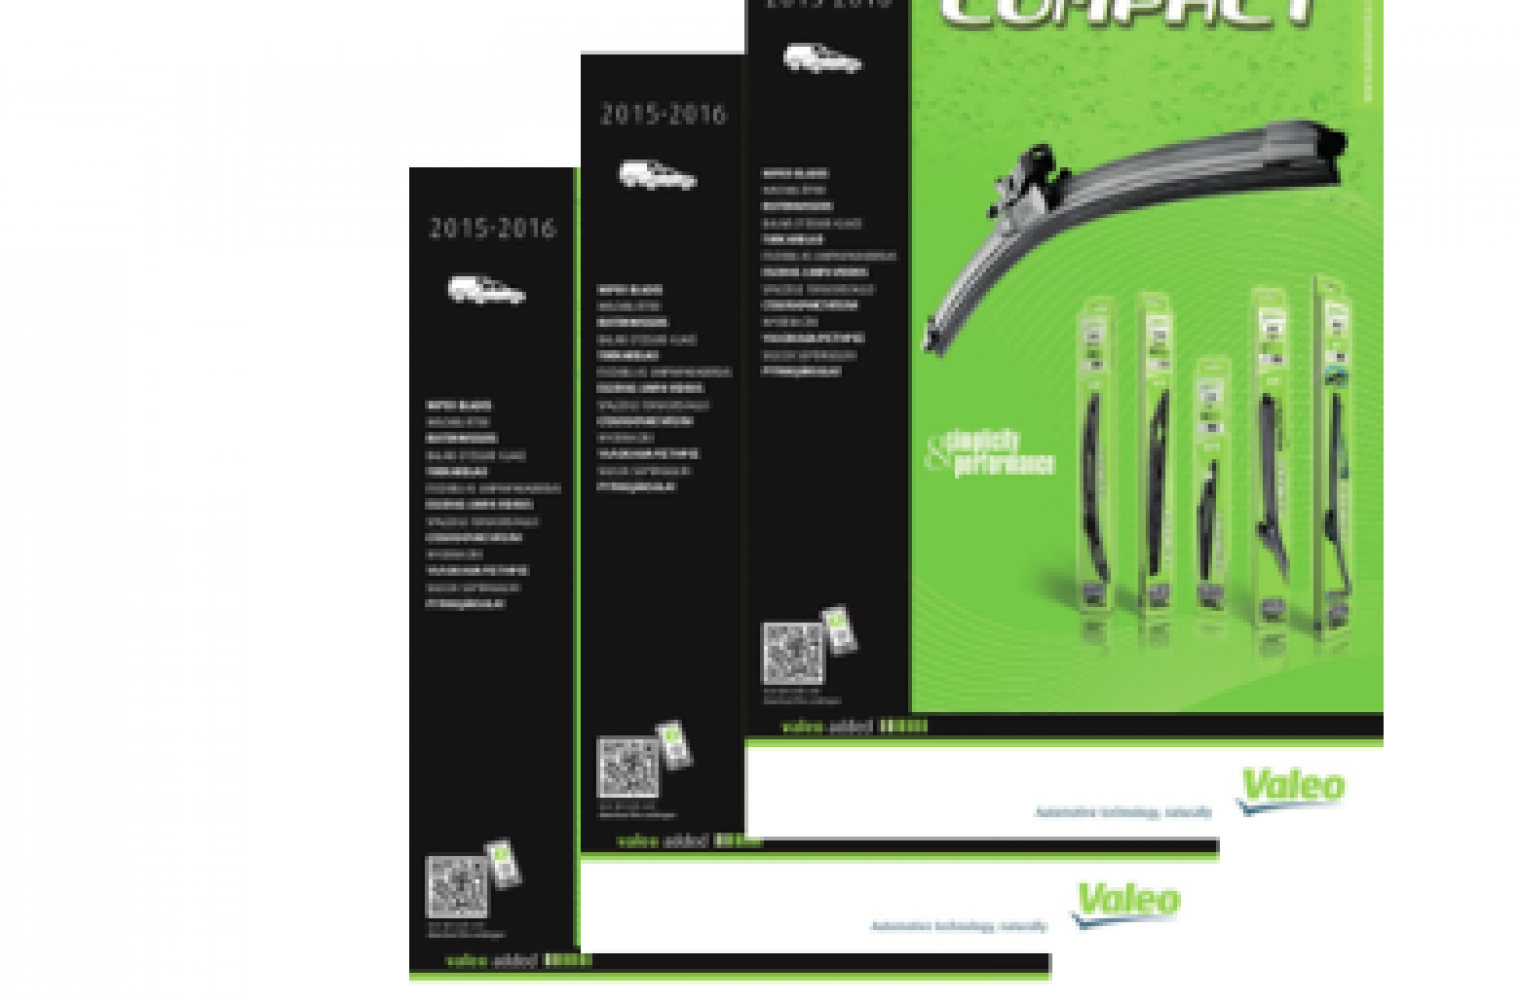 valeo-launches-new-compact-wiper-blades-catalogue-garagewire